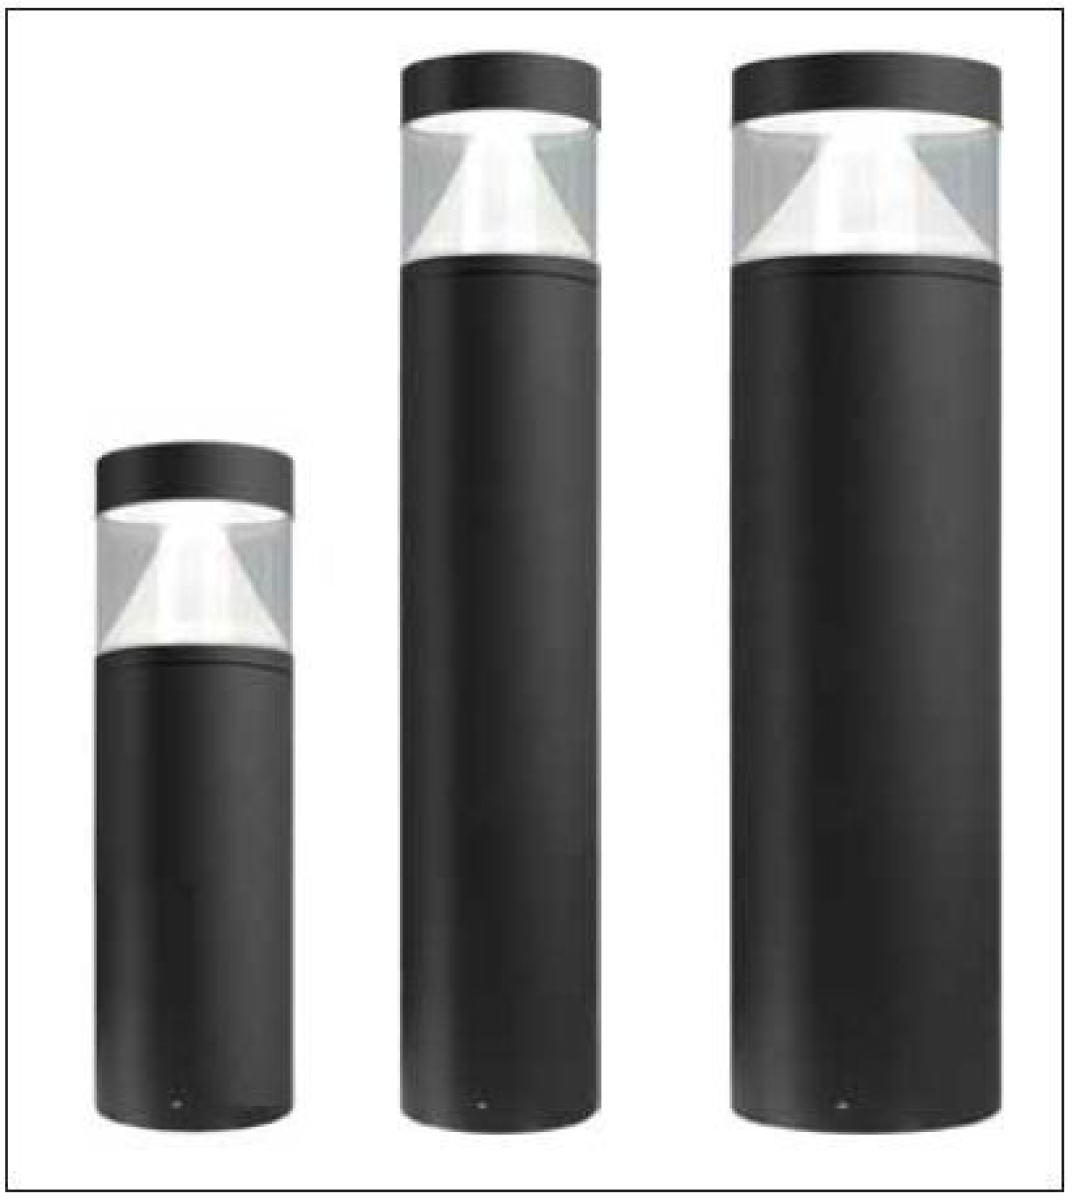 RelcoLED OVEST 800 CELL 9.7W 4000K lm800 NERO IP65 bollard, post, for private gardens or parks LED-West-800Article-No: 24199L